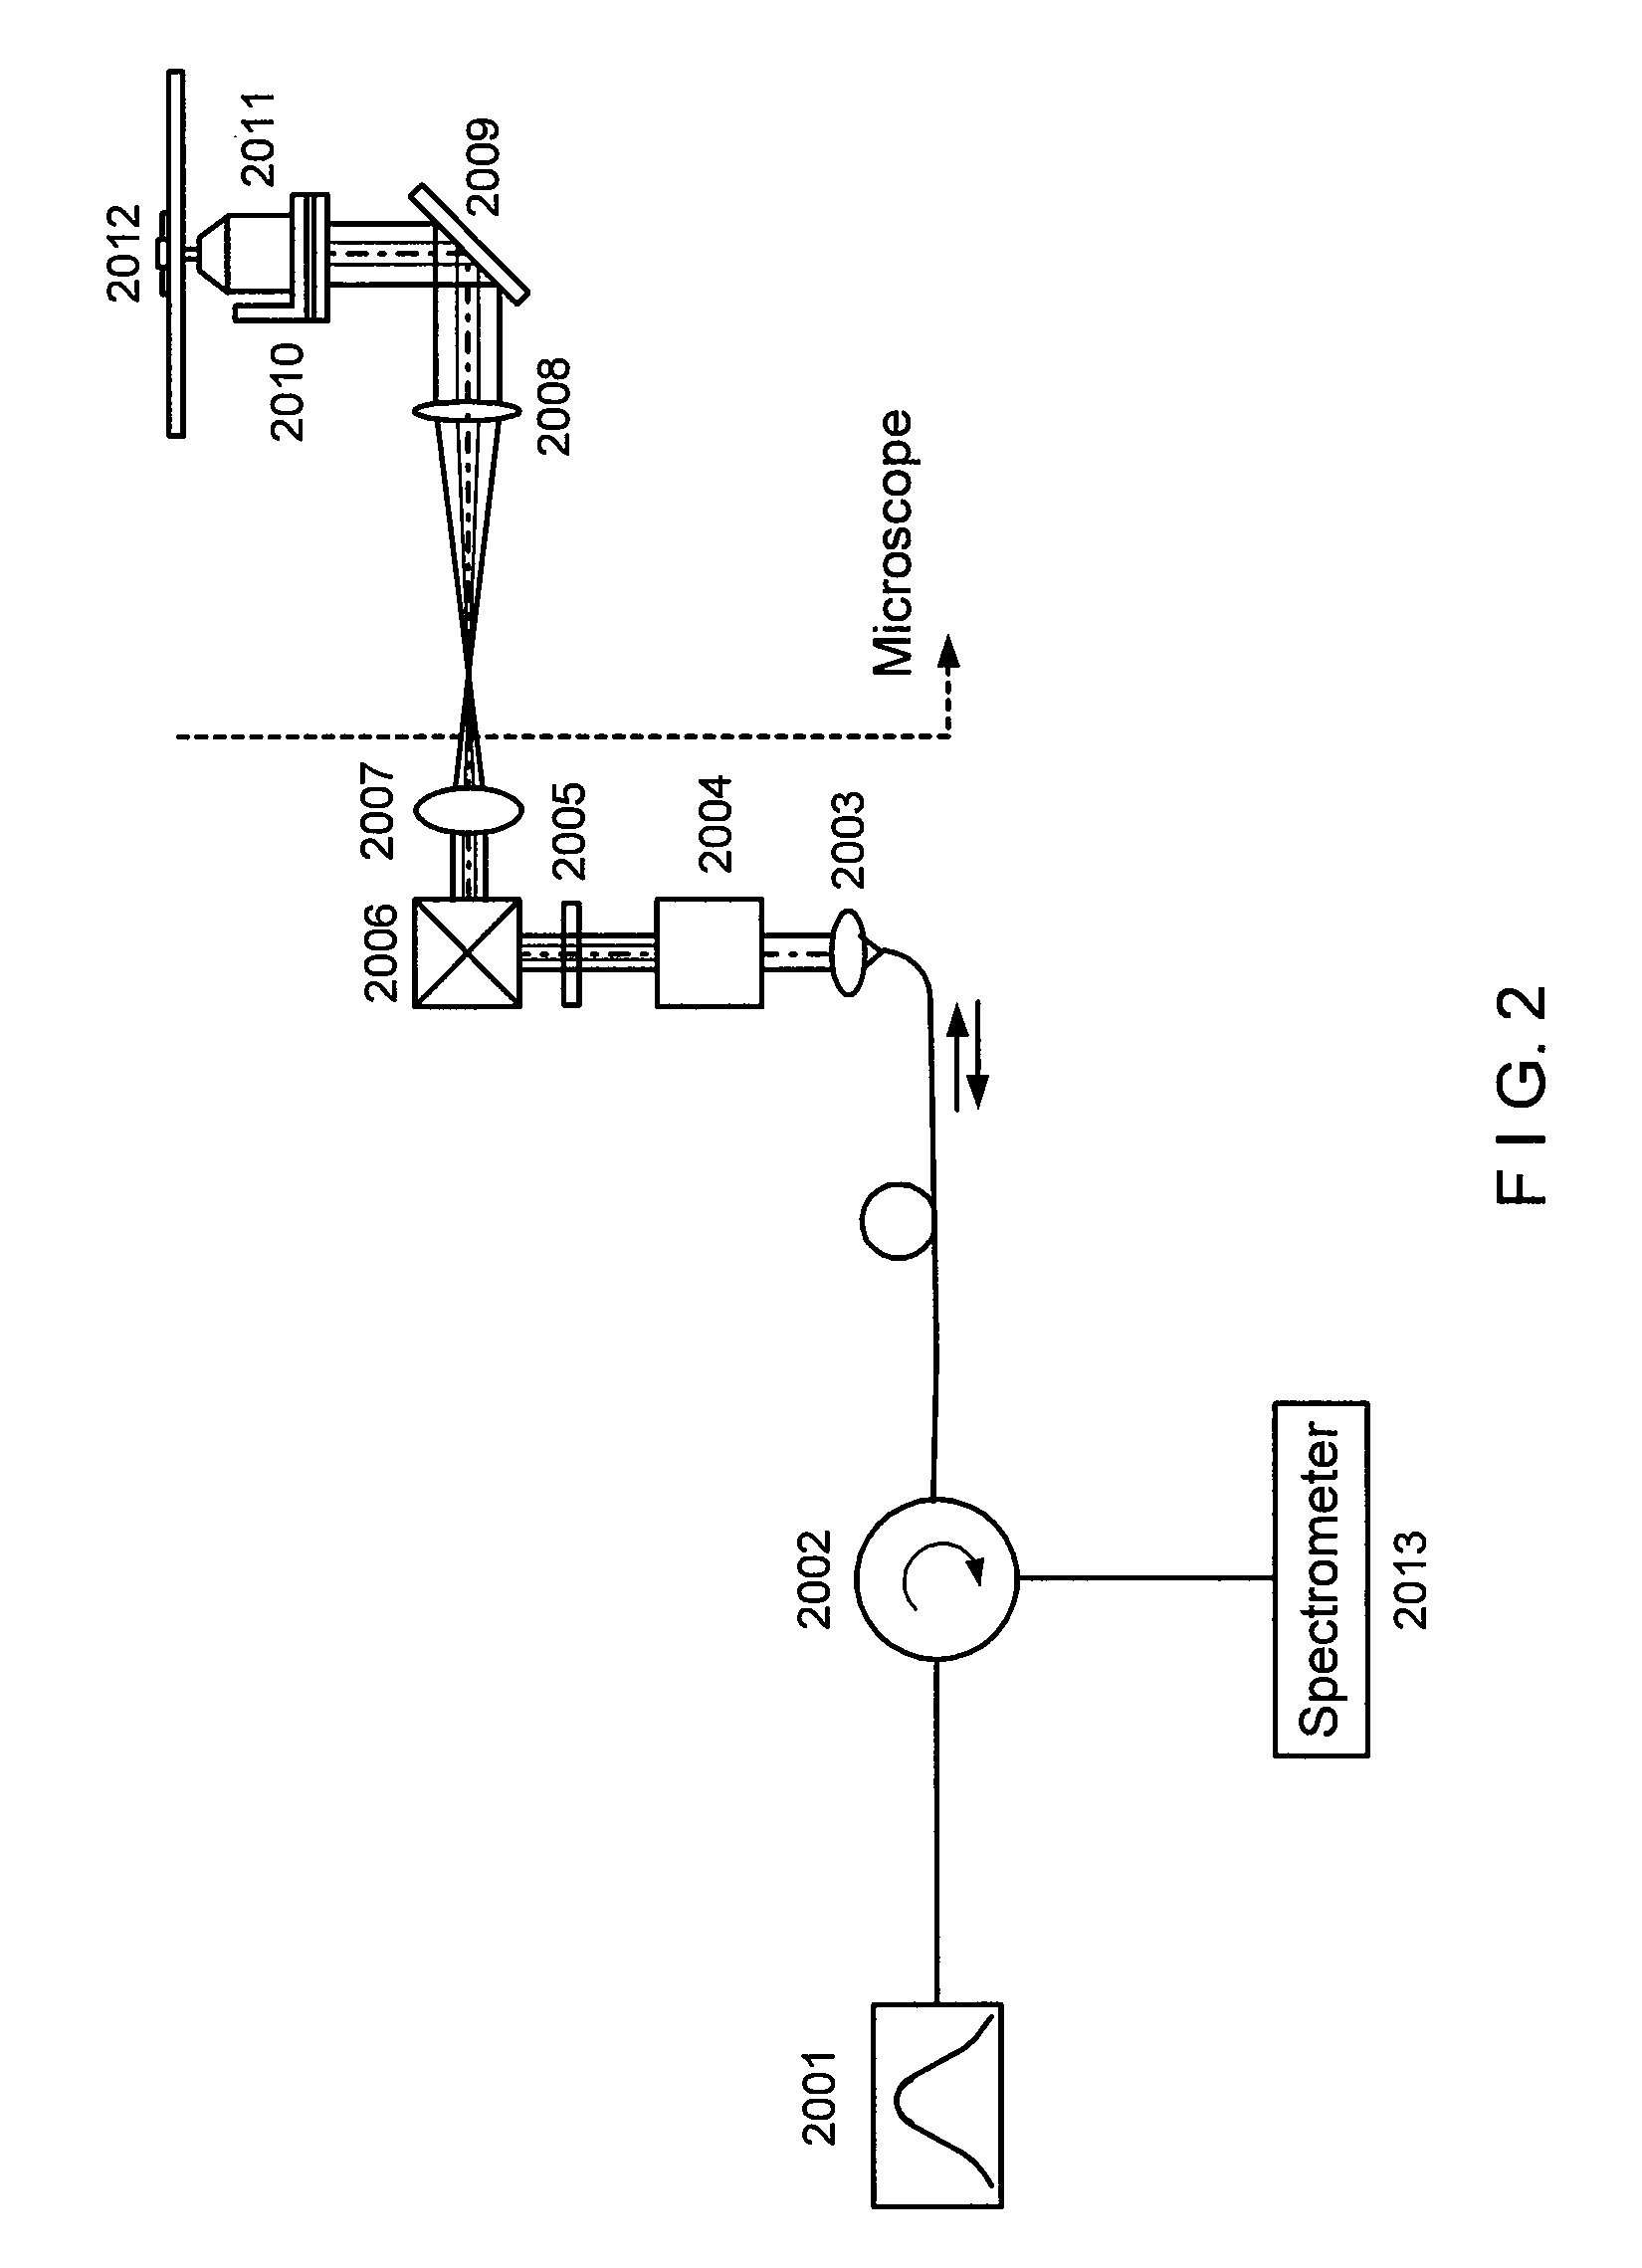 Systems, methods and computer-accessible medium for providing spectral-domain optical coherence phase microscopy for cell and deep tissue imaging